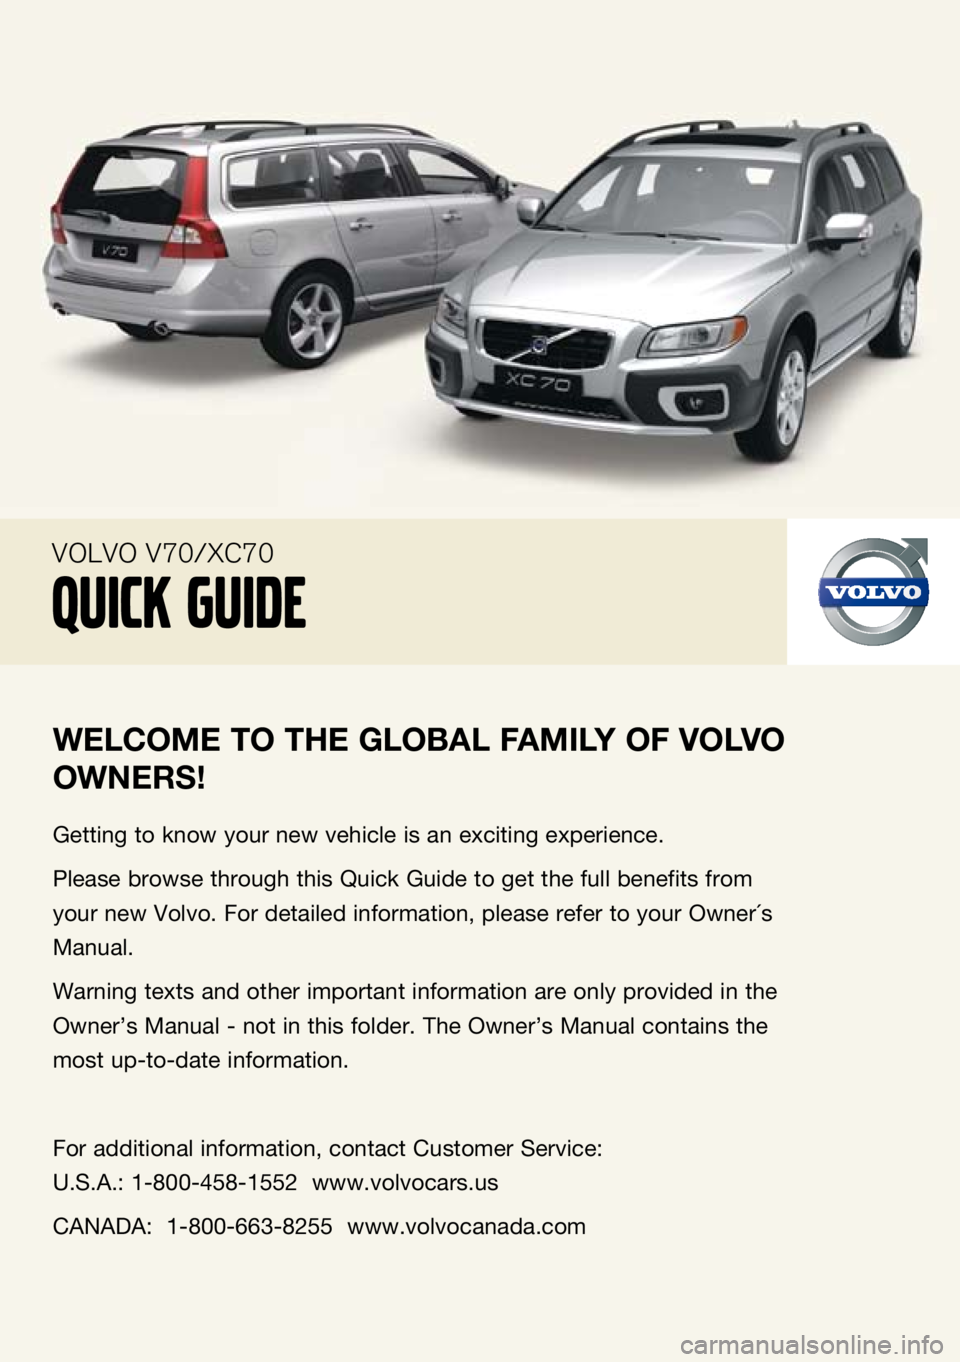 VOLVO XC70 2009  Quick Guide 
welcome to the  gloBAl fA mily  of volvo 
owners !
Getting to know your new vehicle is an exciting experience.
Please browse through this Quick Guide to get the full benefits from 
your new Volvo. Fo